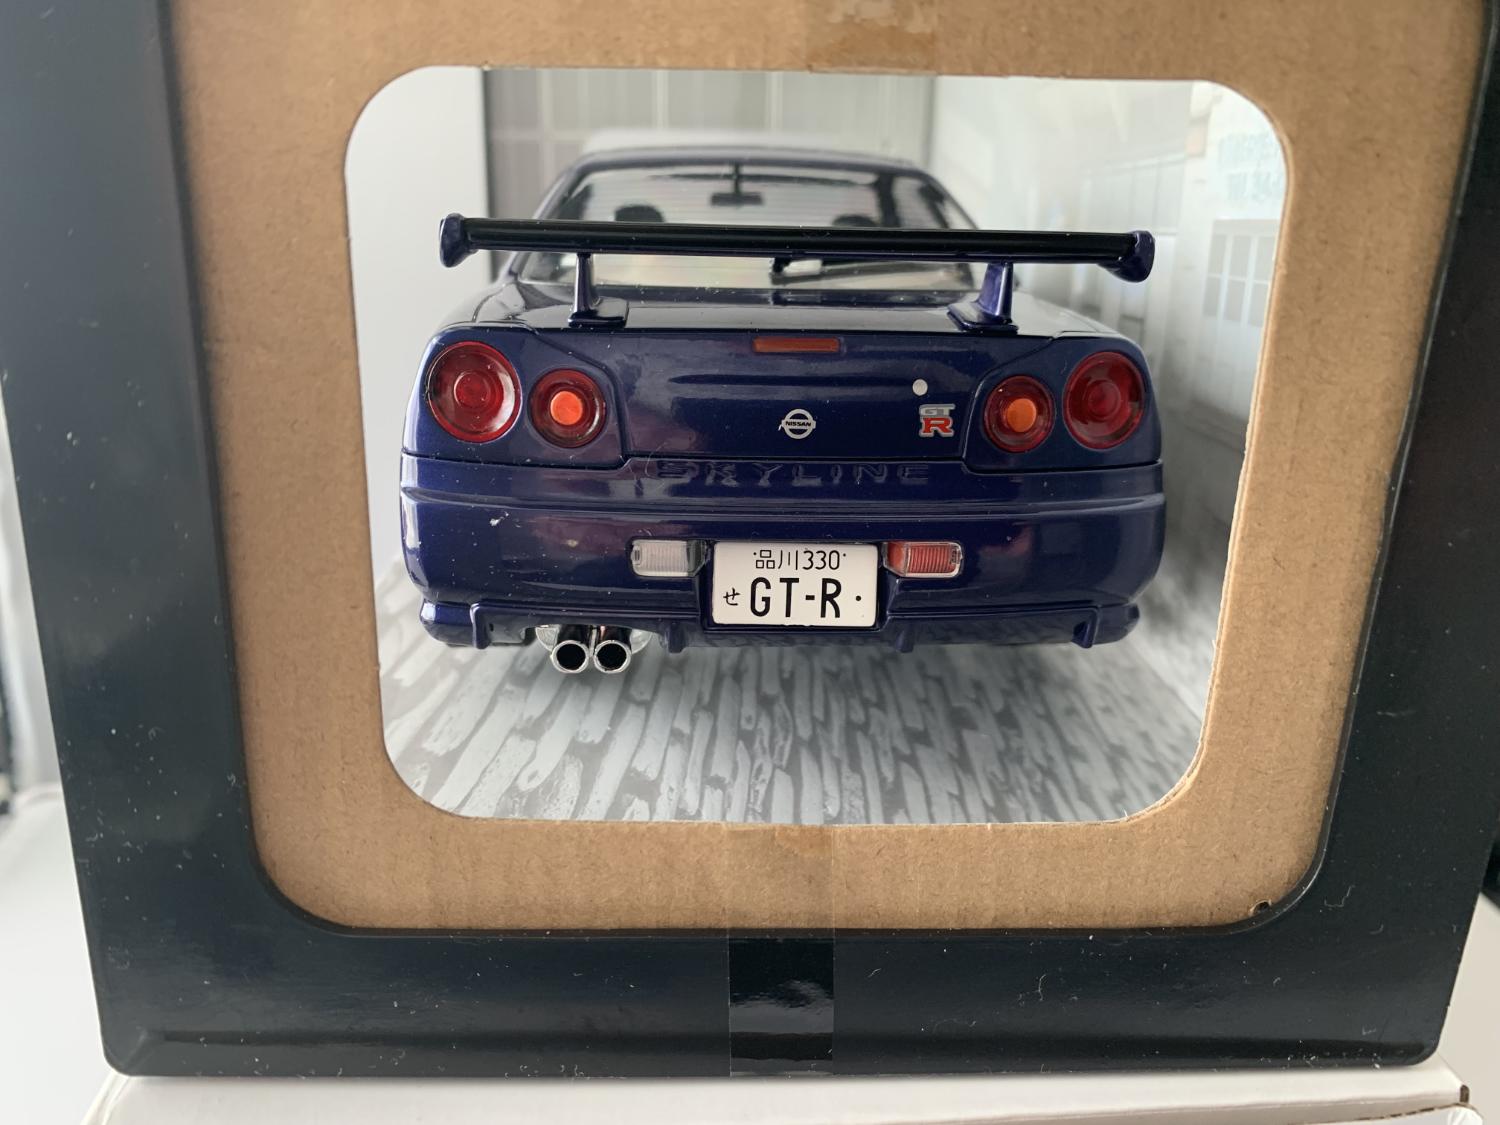 Nissan Skyline GT-R (34) 1999 in midnight purple 1:18 scale model from Solido